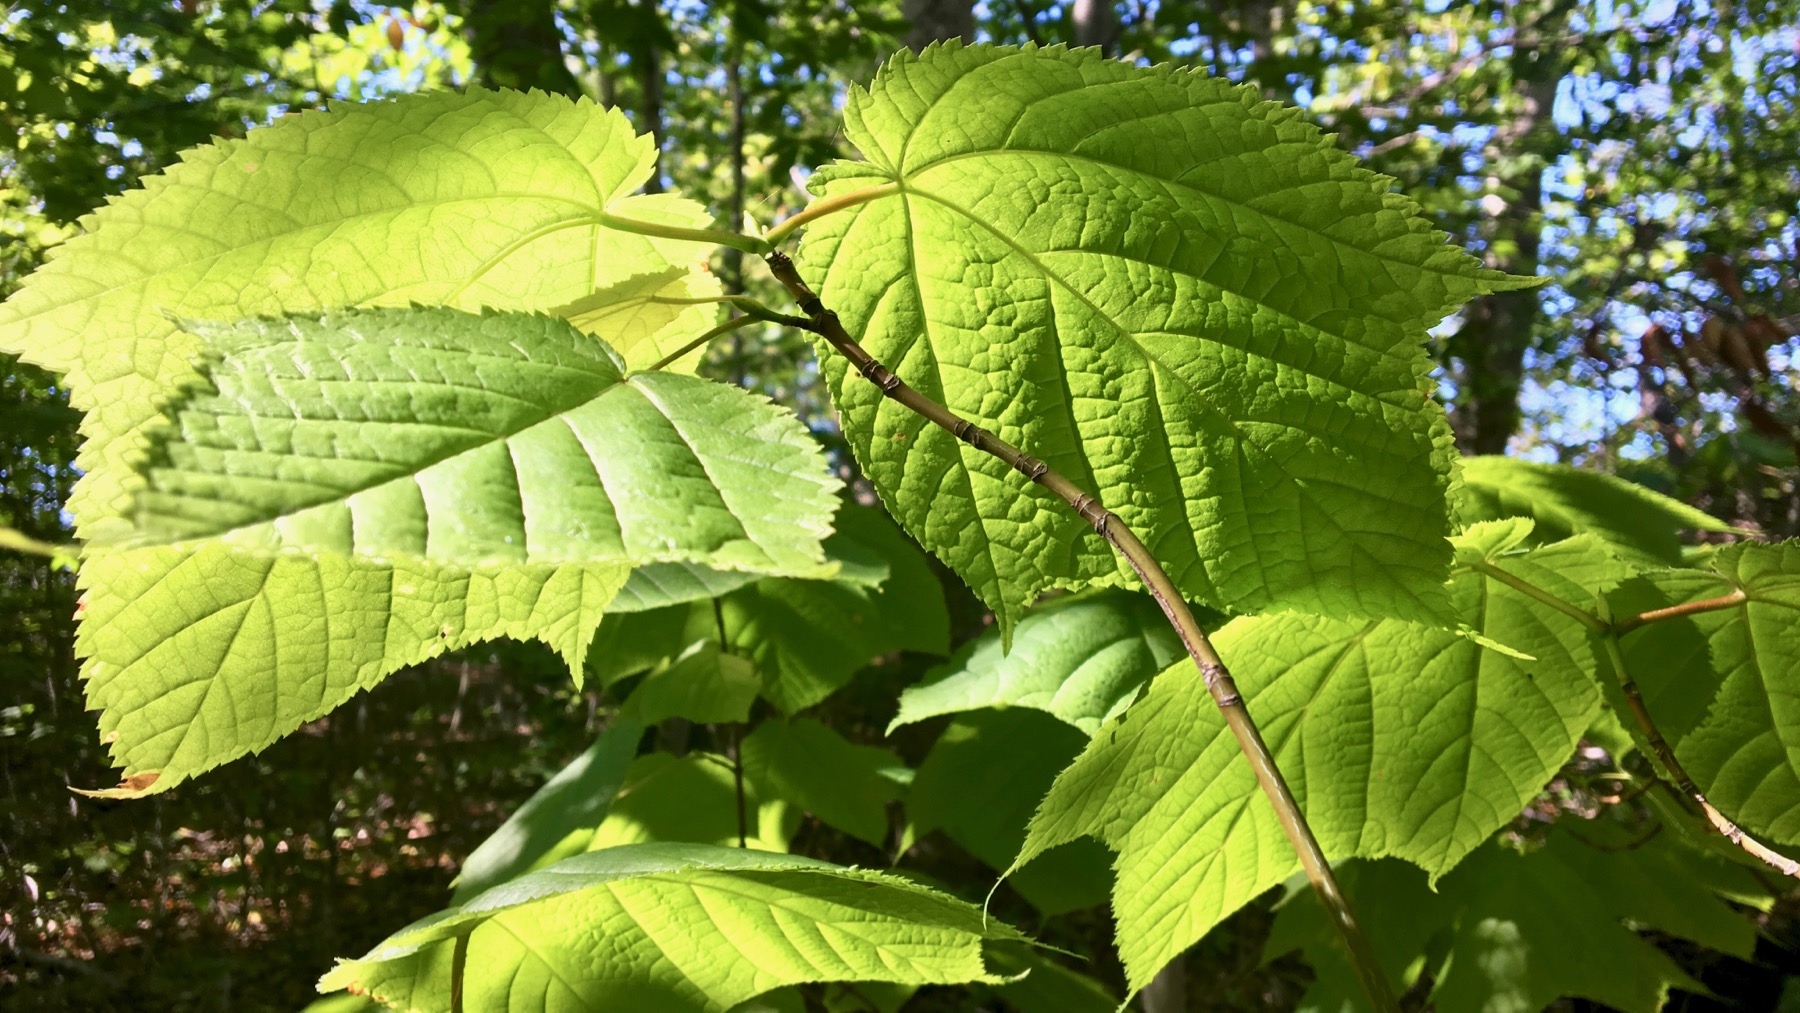 Basswood leaves